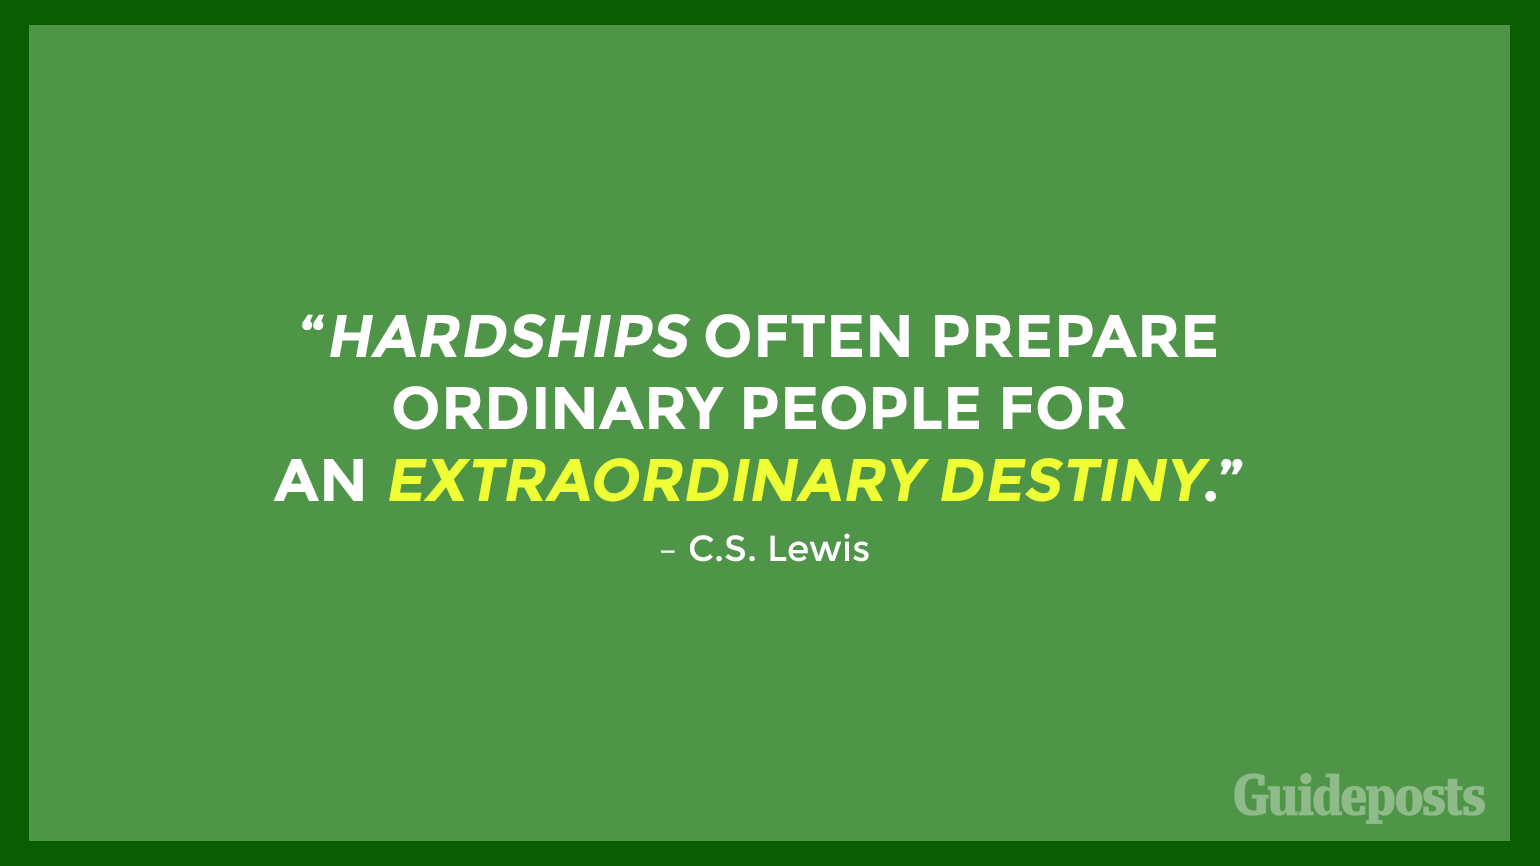 “Hardships often prepare ordinary people for an extraordinary destiny.” – C.S. Lewis